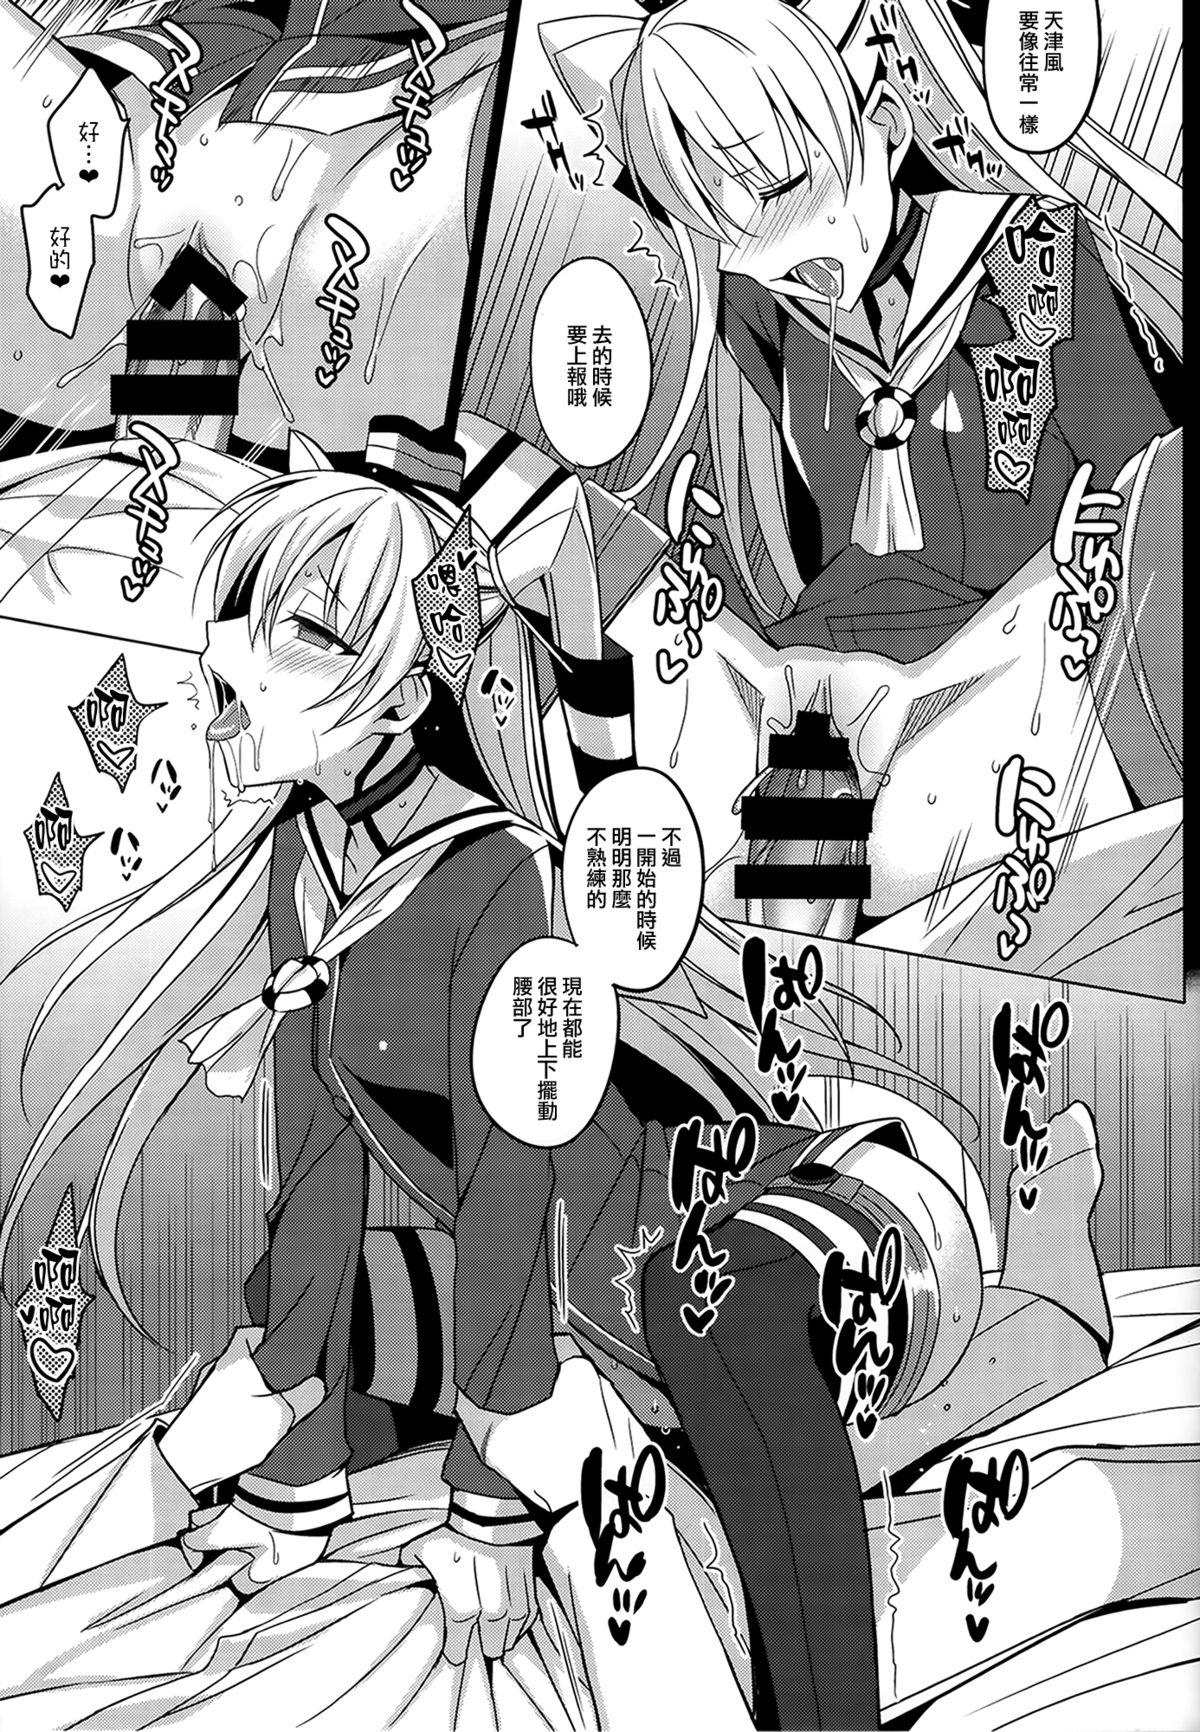 Licking DARKNESS - Kantai collection Audition - Page 7